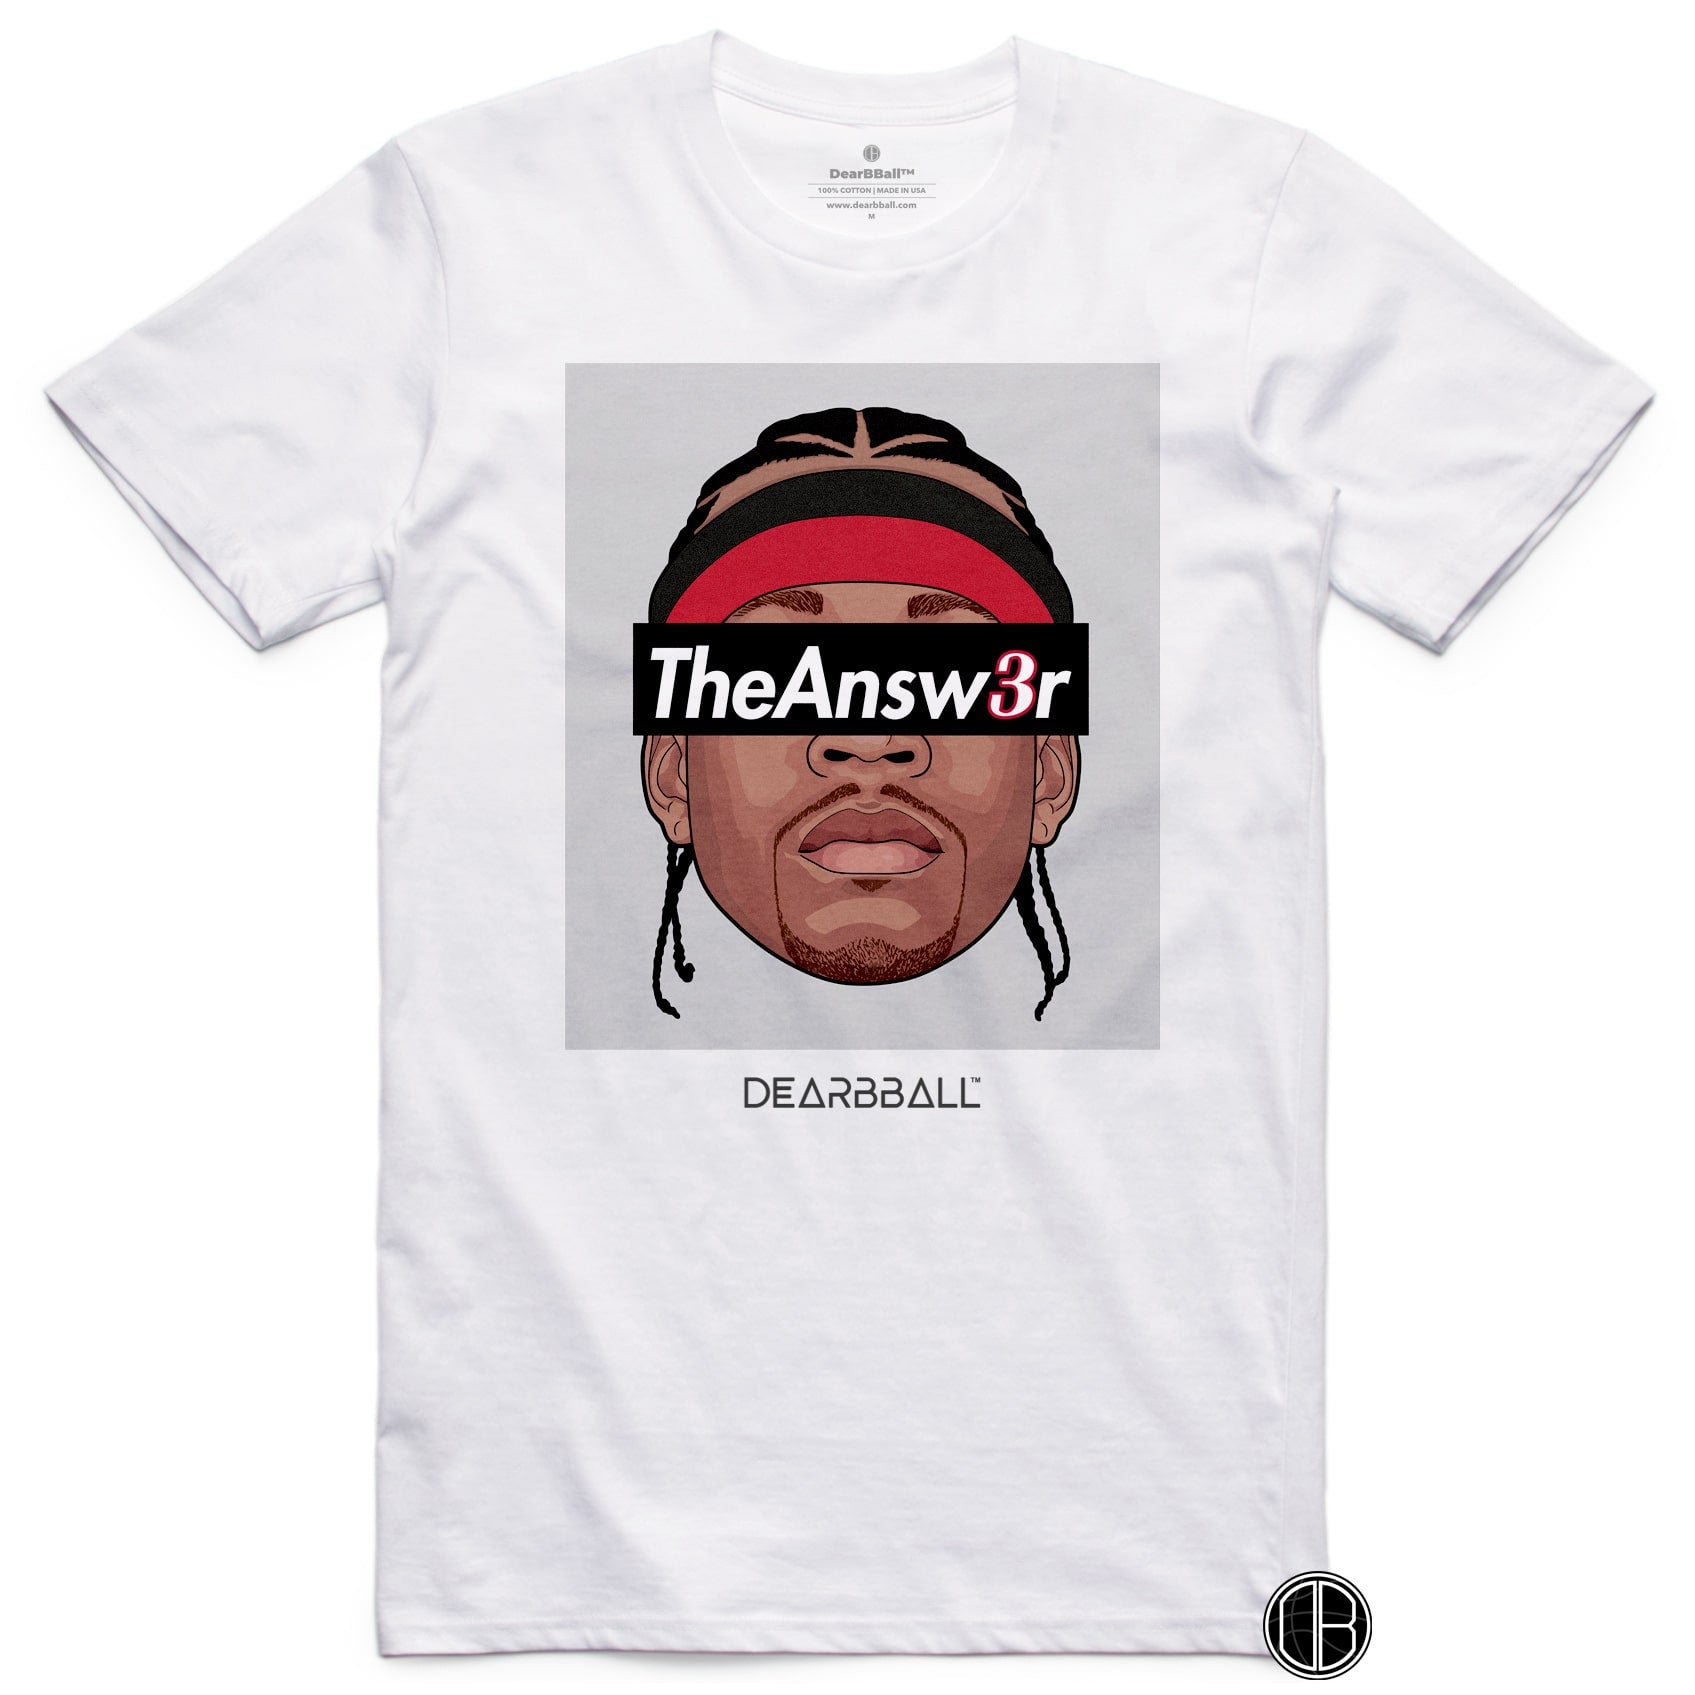 DearBBall T-Shirt - The Answer 3 Edition